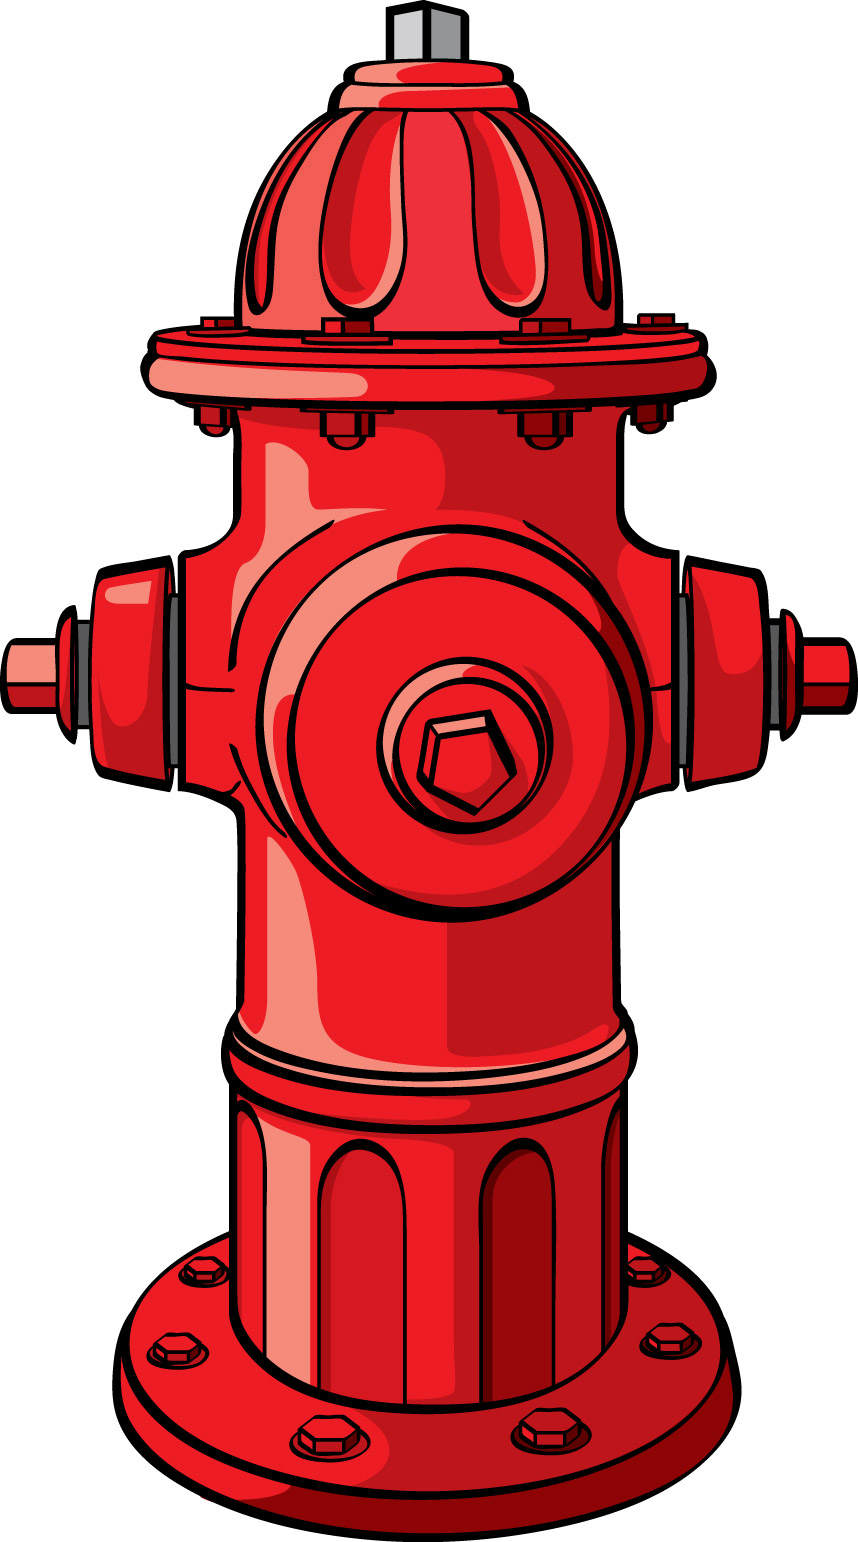 The Use Of Fire Hydrants In The City Of Elyria Is Limited To Fire